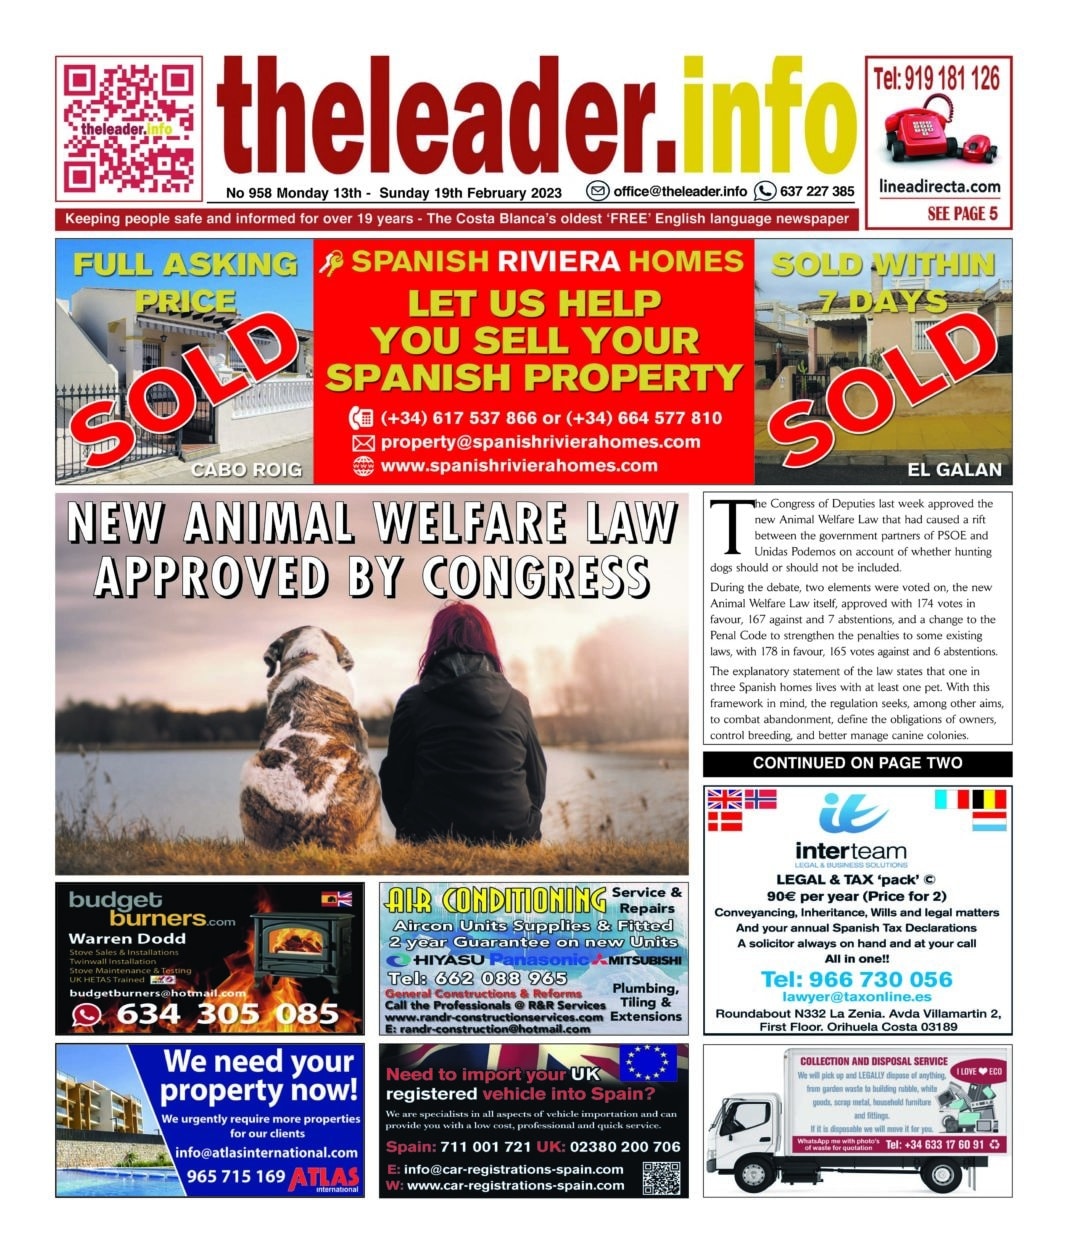 The Leader Newspaper 13 February 23 – Edition 958